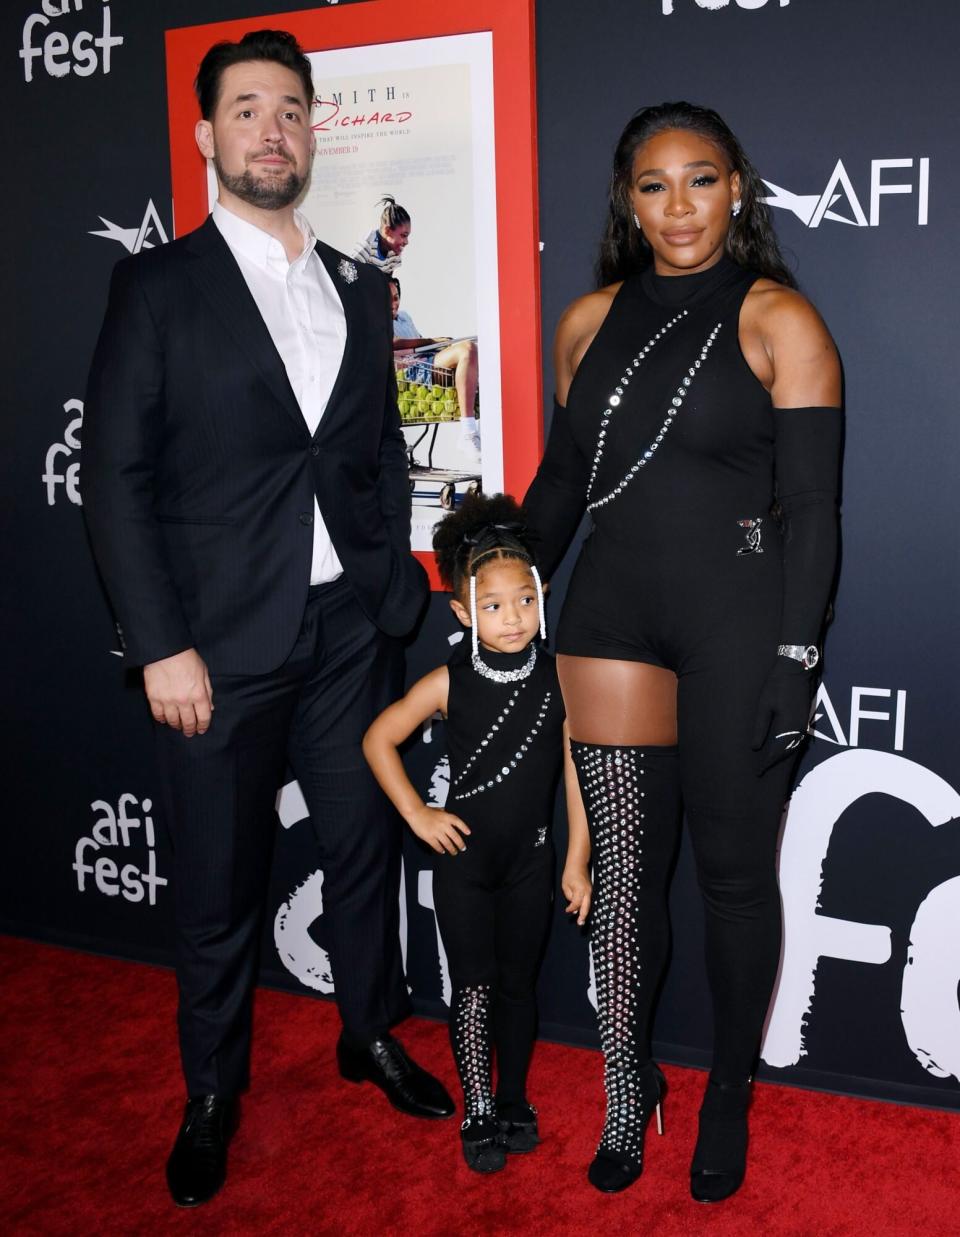 HOLLYWOOD, CALIFORNIA - NOVEMBER 14: (L-R) Alexis Ohanian, Olympia Ohanian Jr, and Serena Williams attend the 2021 AFI Fest Closing Night Premiere of Warner Bros. "King Richard" at TCL Chinese Theatre on November 14, 2021 in Hollywood, California. (Photo by Jon Kopaloff/Getty Images)